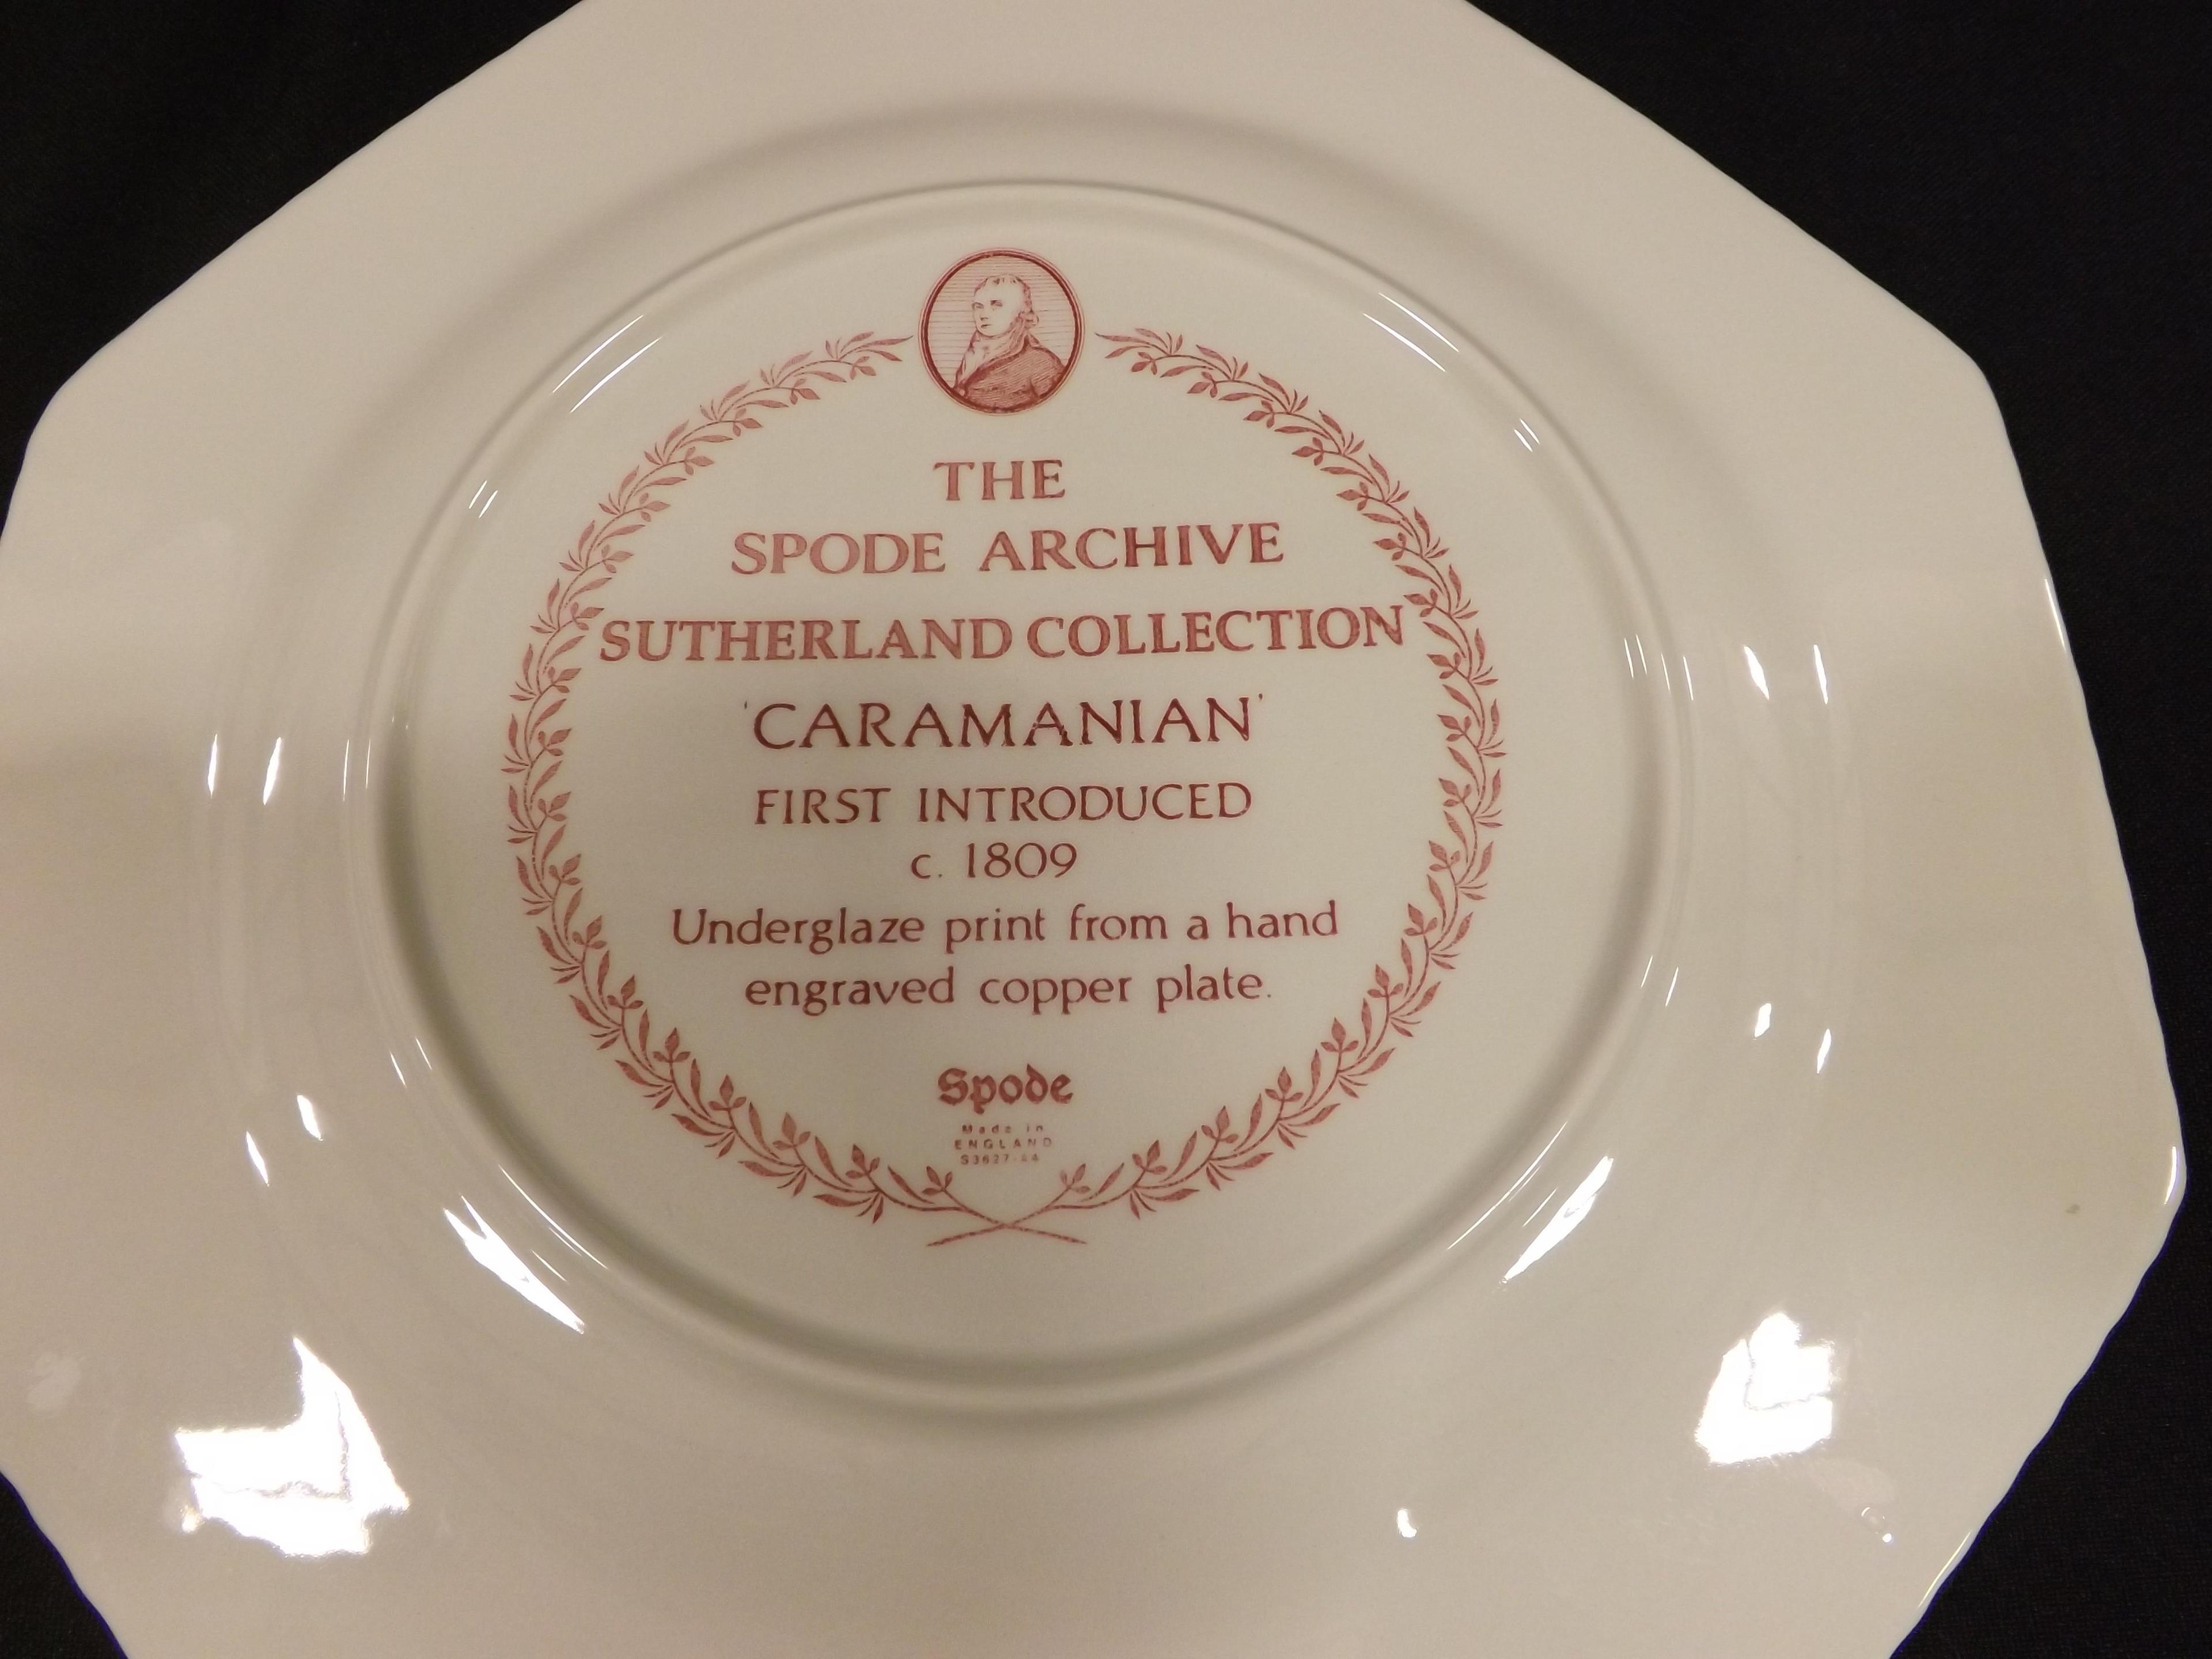 The Spode Archive Sutherland Collection